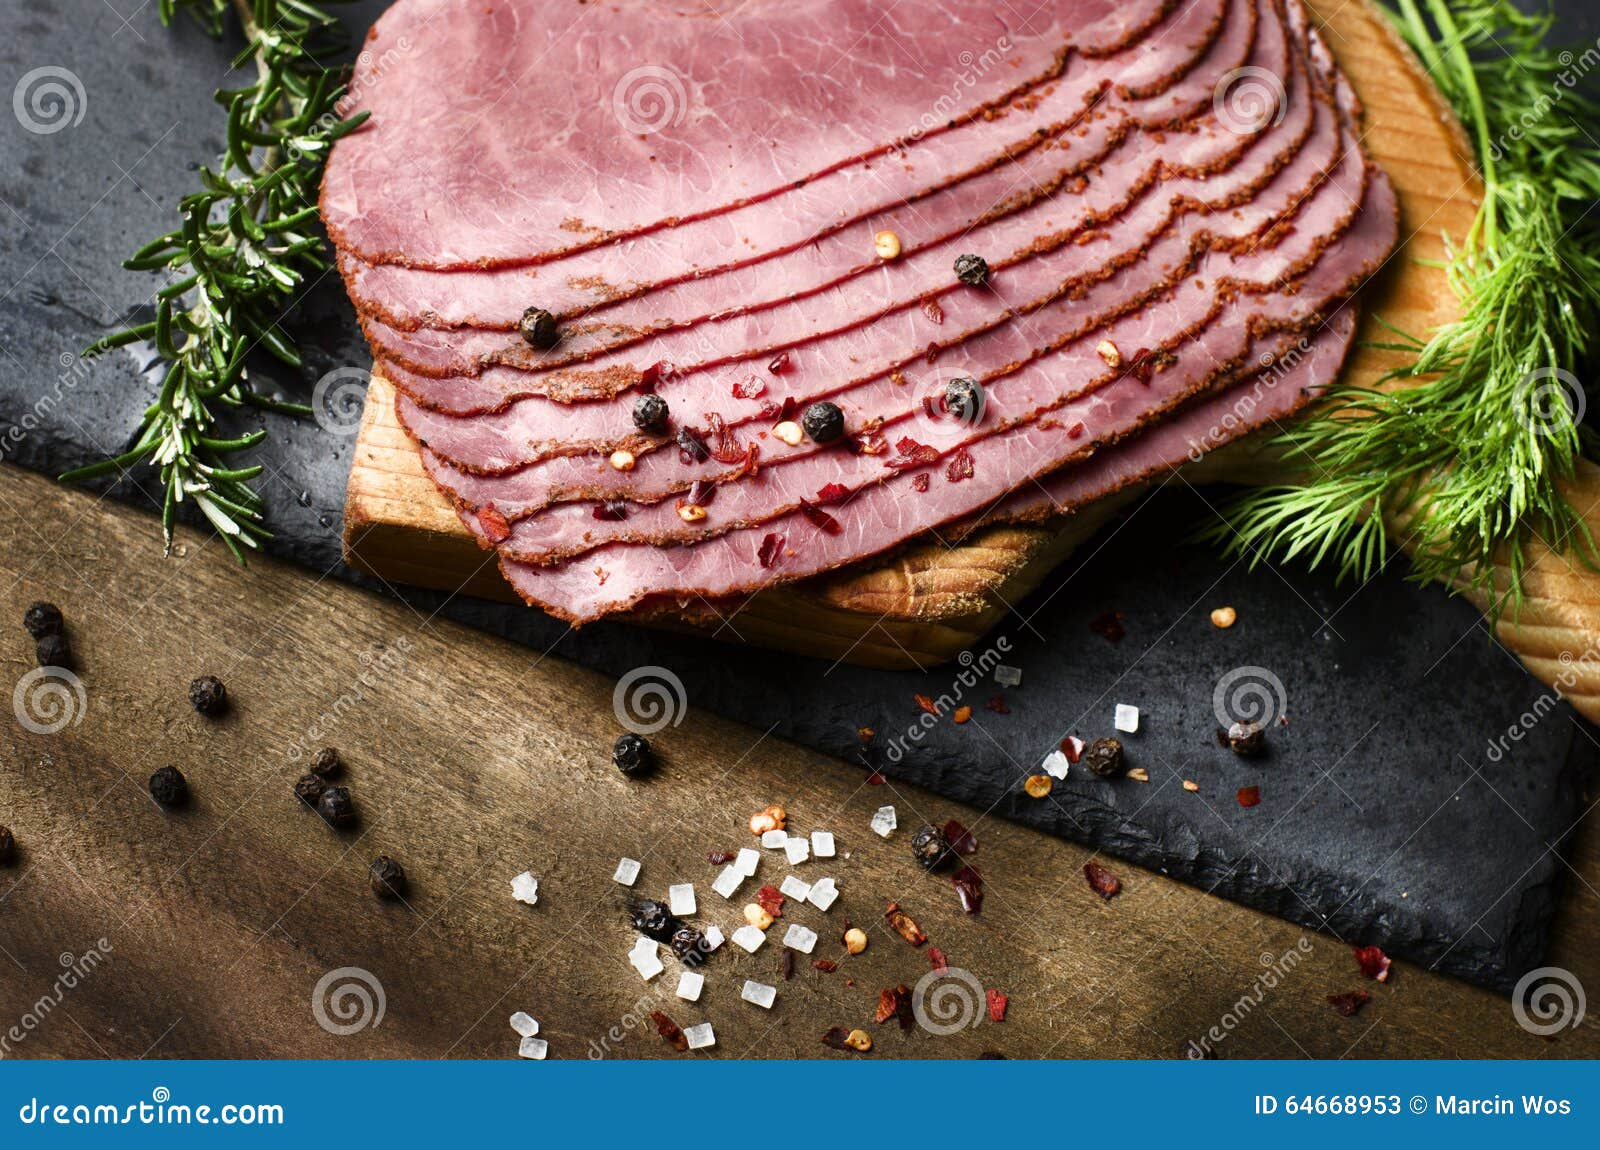 fresh sliced beef pastrami surrounded by herbs in wooden chopping board